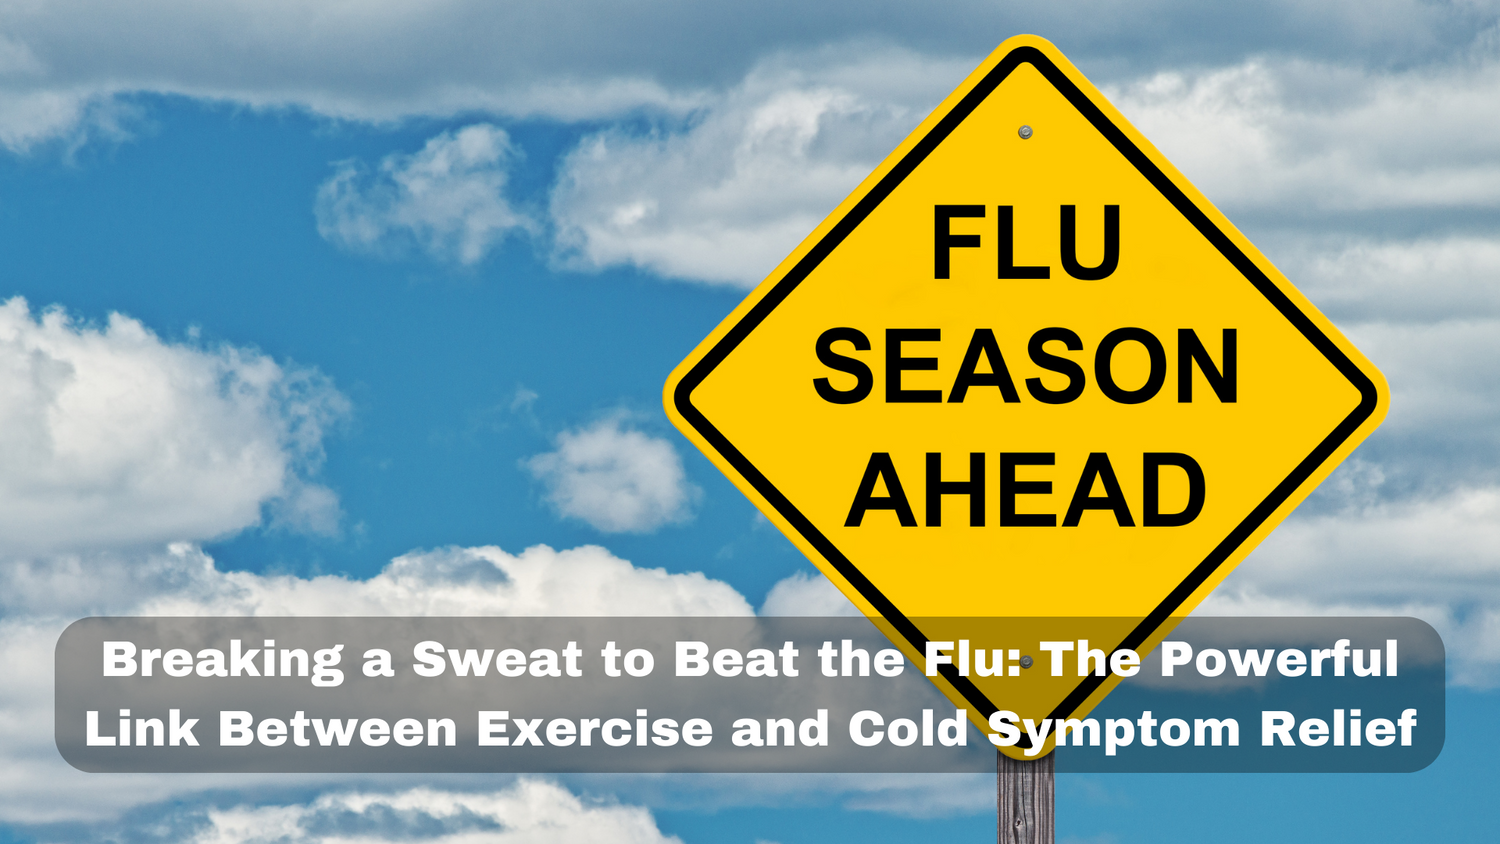 Breaking a Sweat to Beat the Flu: The Powerful Link Between Exercise and Cold Symptom Relief